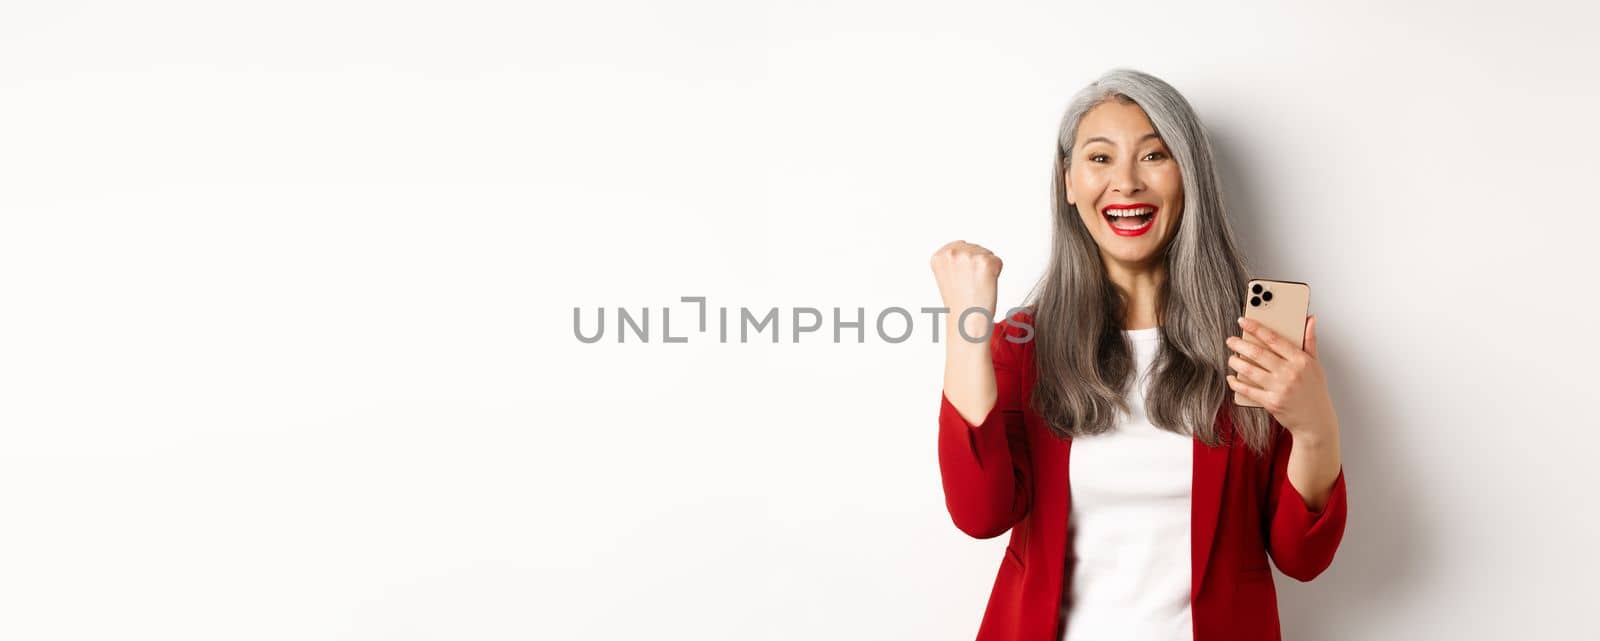 Asian old woman winning online, holding smartphone and making fist pump gesture to celebrate win, triumphing and smiling, standing over white background.